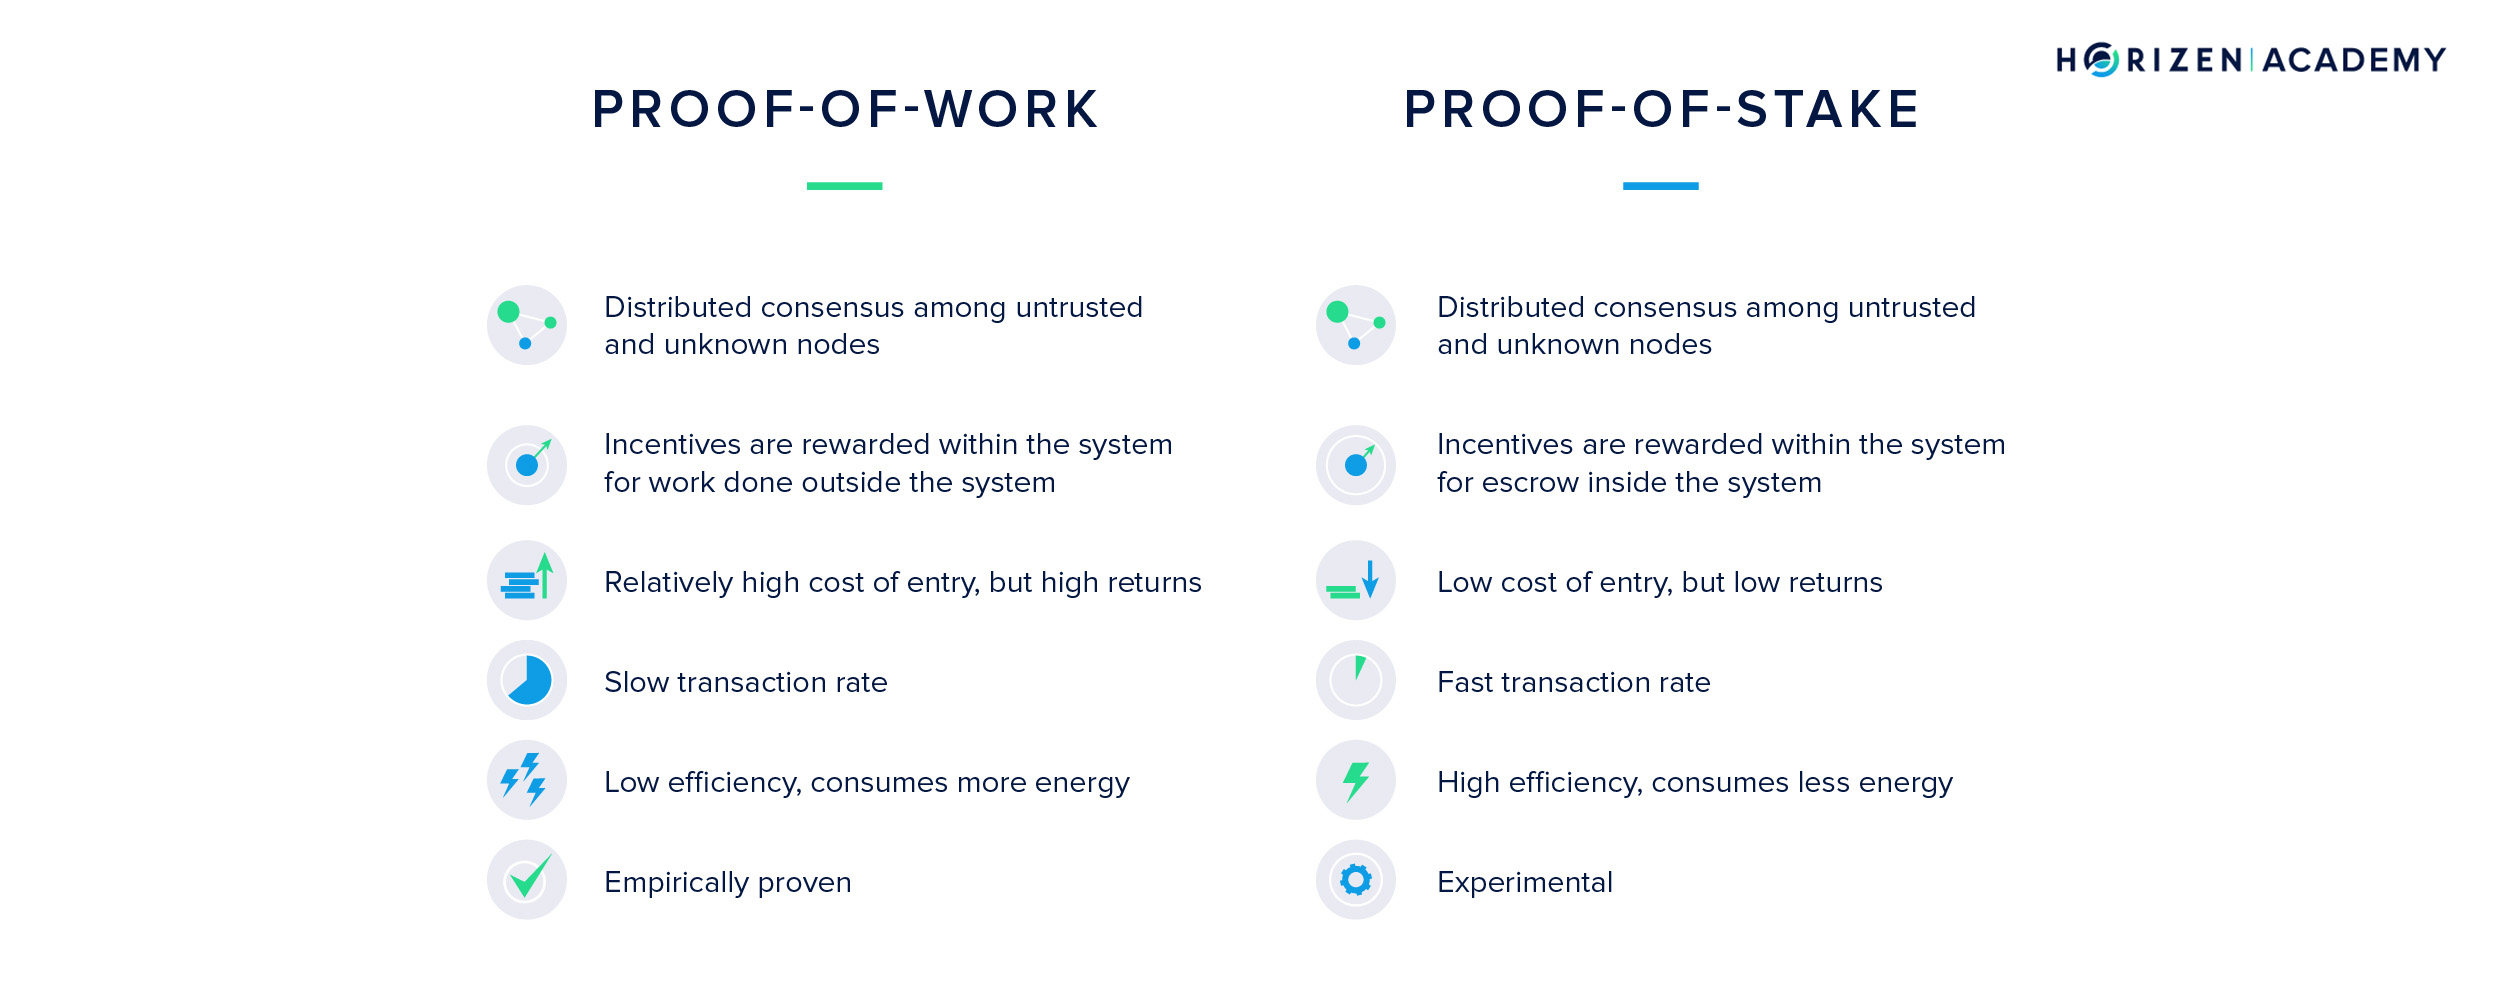 Comparing POW and POS